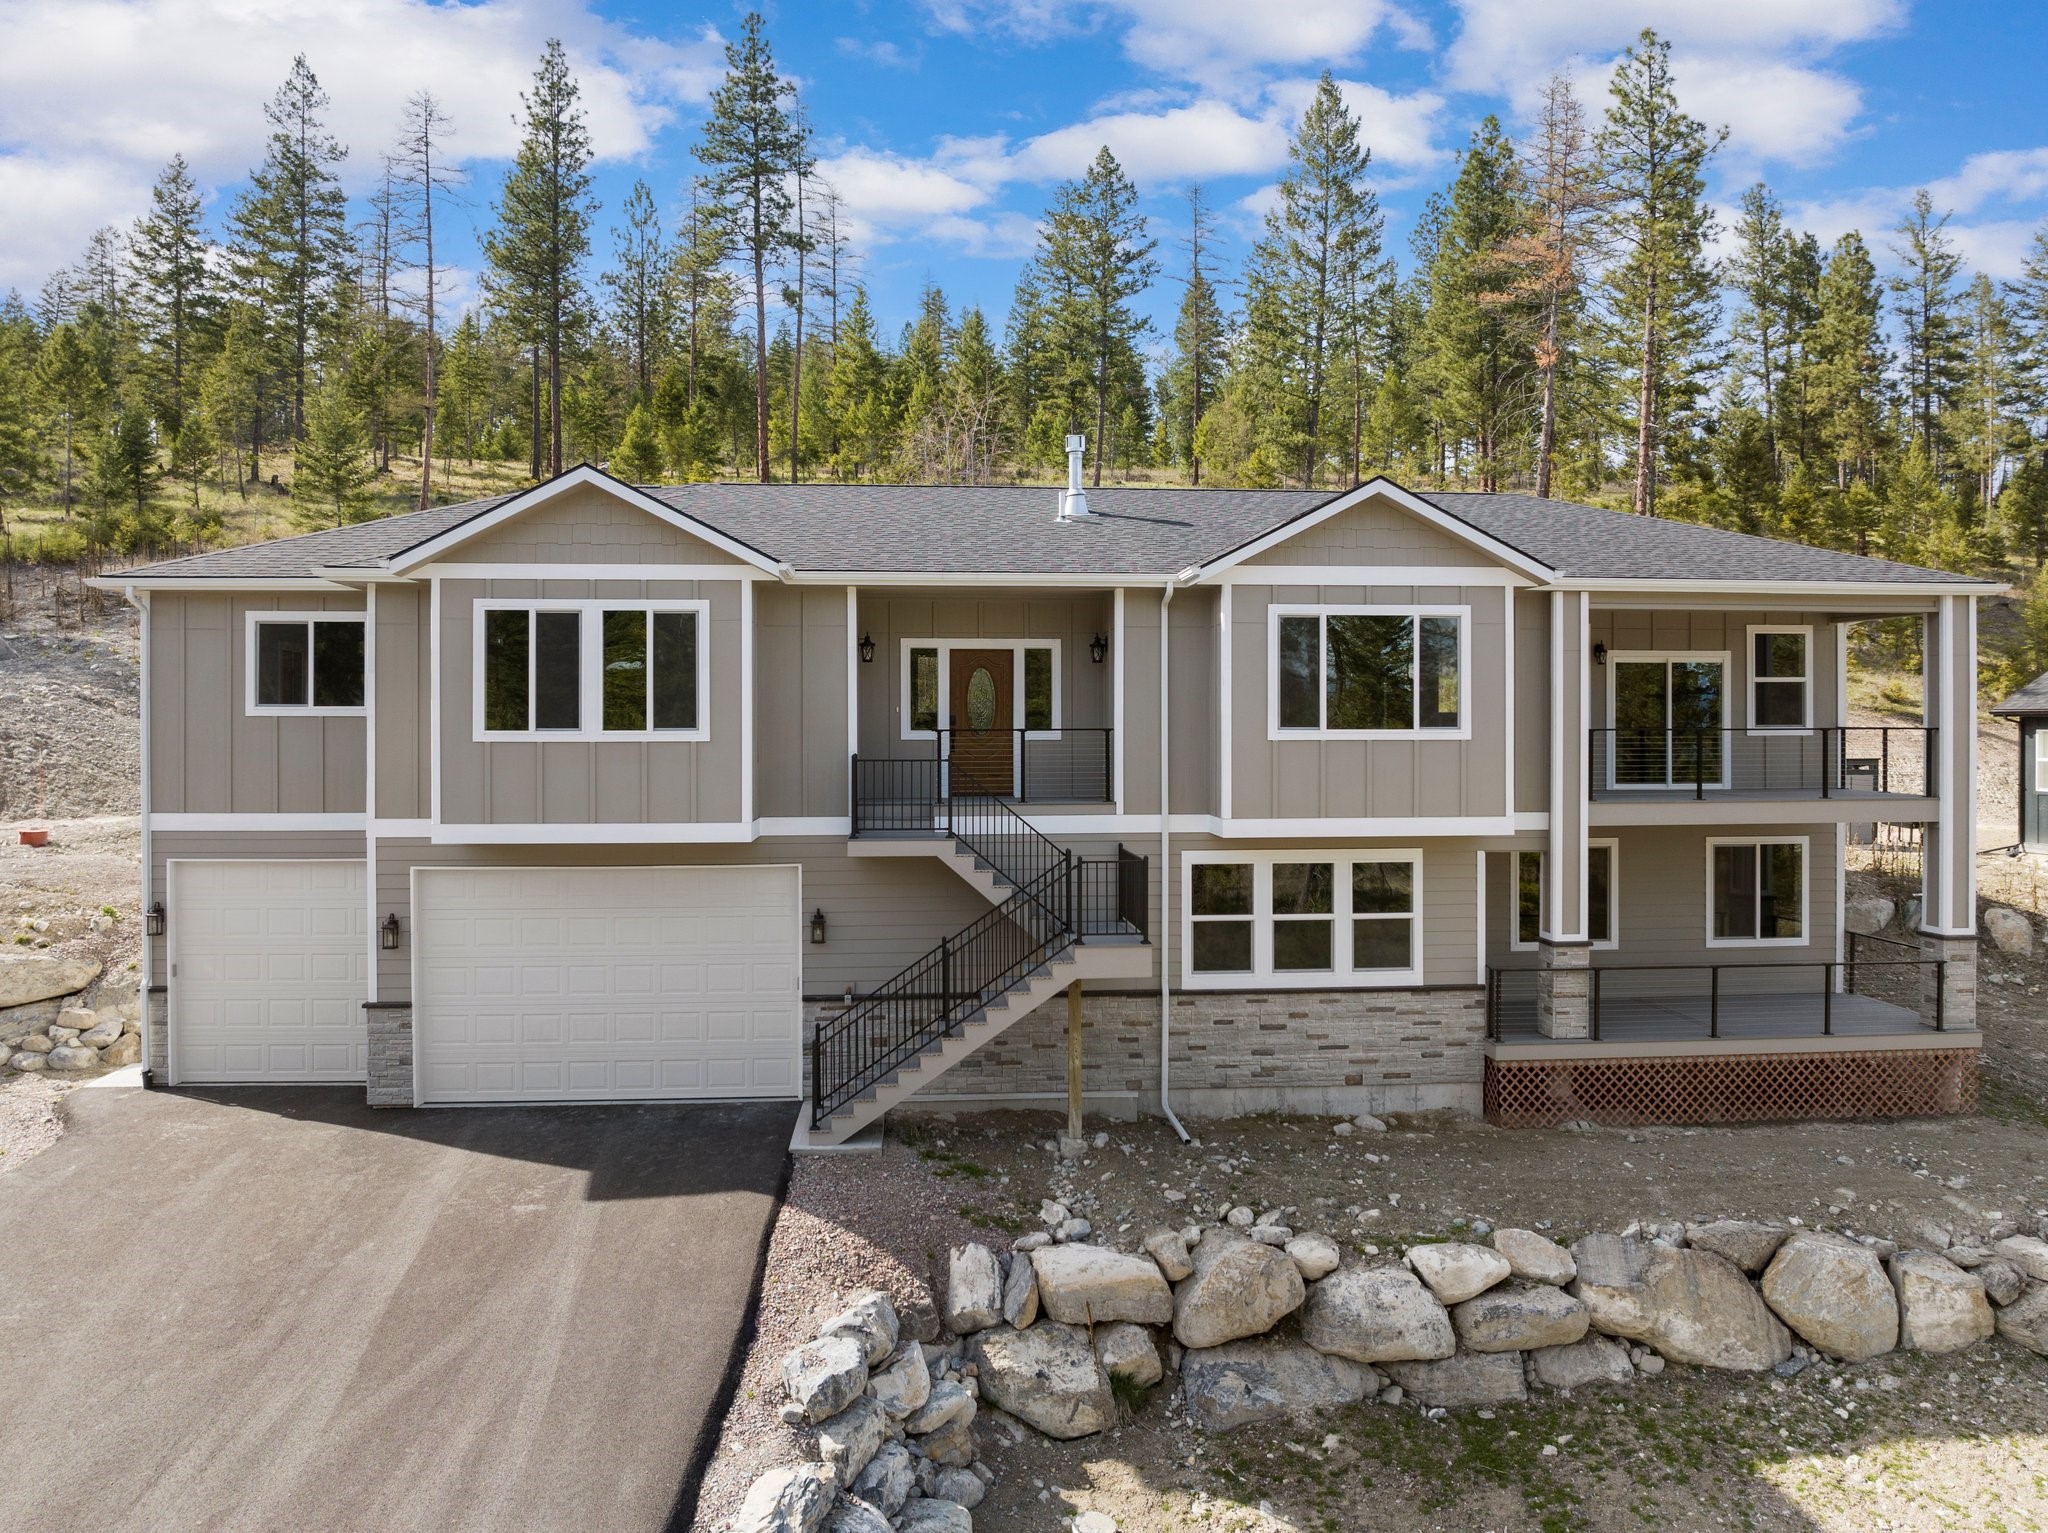 Stunningly beautiful, brand new 4,298 square foot custom home with 4 bedrooms, 4 baths on .49 acres just minutes to Flathead Lake & Blacktail Ski Resort! Enjoy the cozy gas fireplace in the large great room, the magnificent kitchen with Thermador stainless appliances, cherry cabinets, Granite countertops, and 10' breakfast bar. Office is off the living room with French doors, & slider to back deck. The 1st master suite has a huge custom closet, walk-in tile shower, & deep standalone tub.  2nd master has walk-in shower, stand alone soaking tub  & walk-in closet  The lower level has two large bedrooms, full bathroom, laundry, huge mechanical room, and huge family room. Exterior access to covered west deck off kitchen with Trex deck & iron railing, and exterior access to east deck off dining room with Trex and horizontal cable railing. Two 50 gal hot water tanks, with 29'x51' - 5 car finished/insulated/heated garage. Call Debbie Chase 406-499-1213 or your real estate professional today.